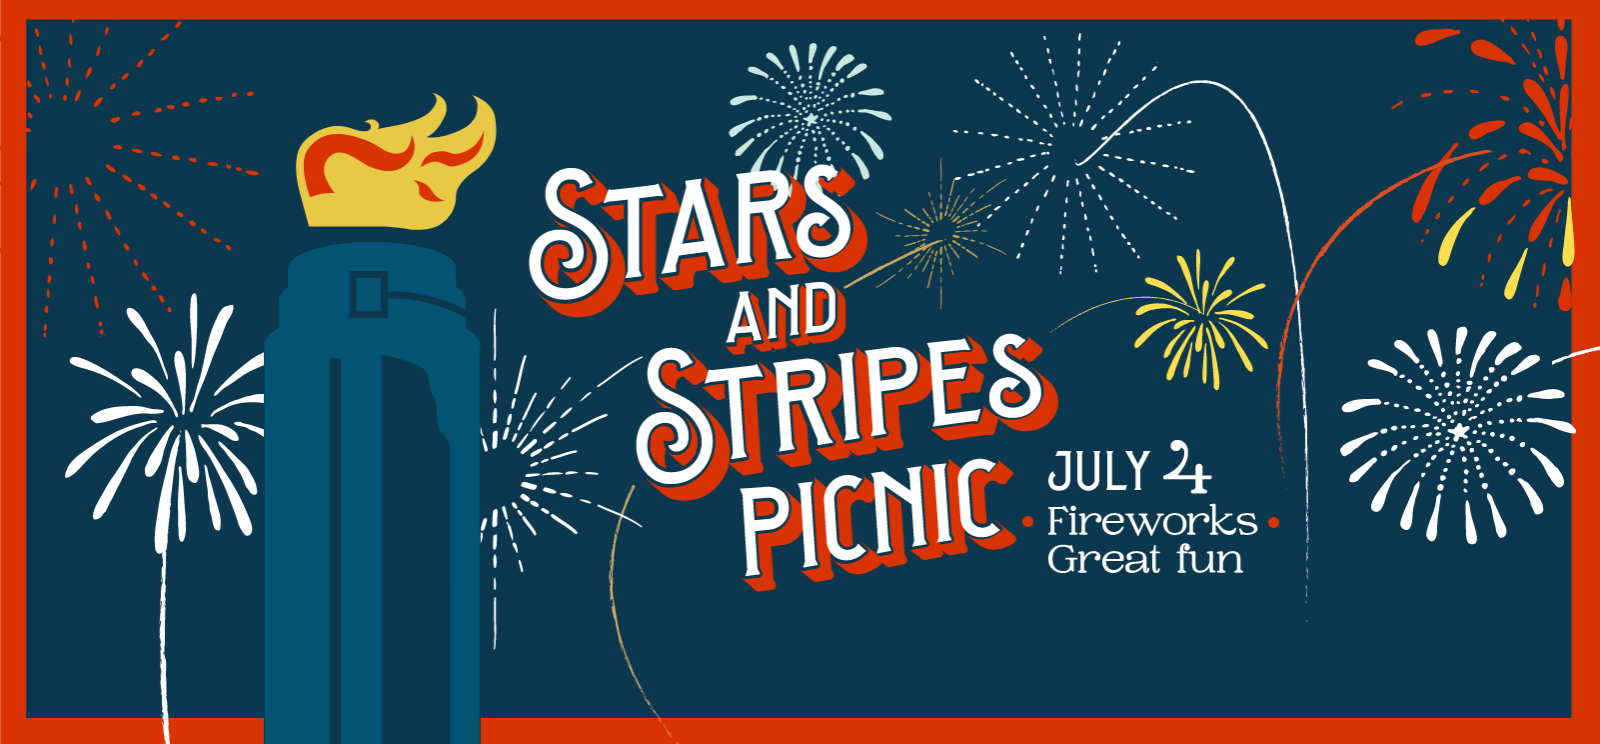 Stylized drawing of the Liberty Memorial Tower with a flame on top and fireworks in the background. Text: Stars And Stripes Picnic / July 4 / Fireworks / Great Fun